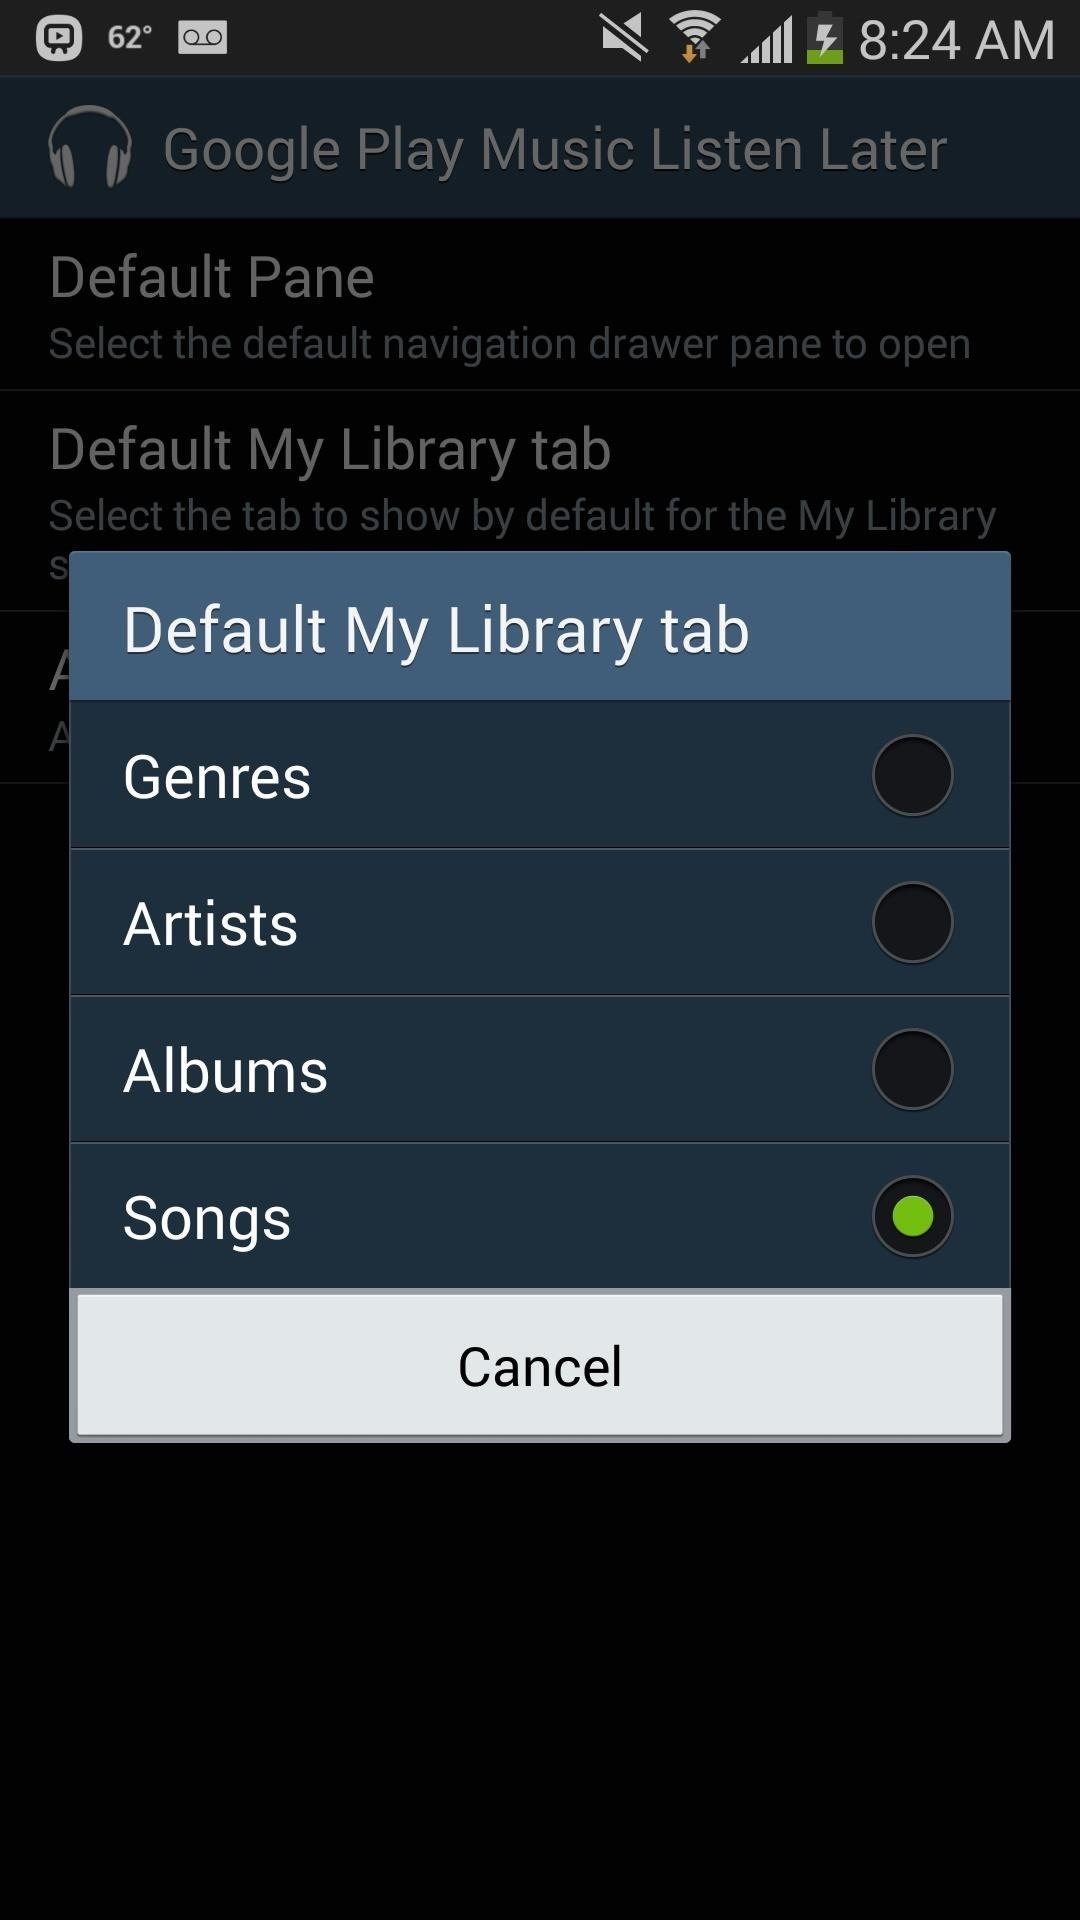 How to Customize the Default Landing Screen & Tab for Google Play Music on Your Galaxy Note 3